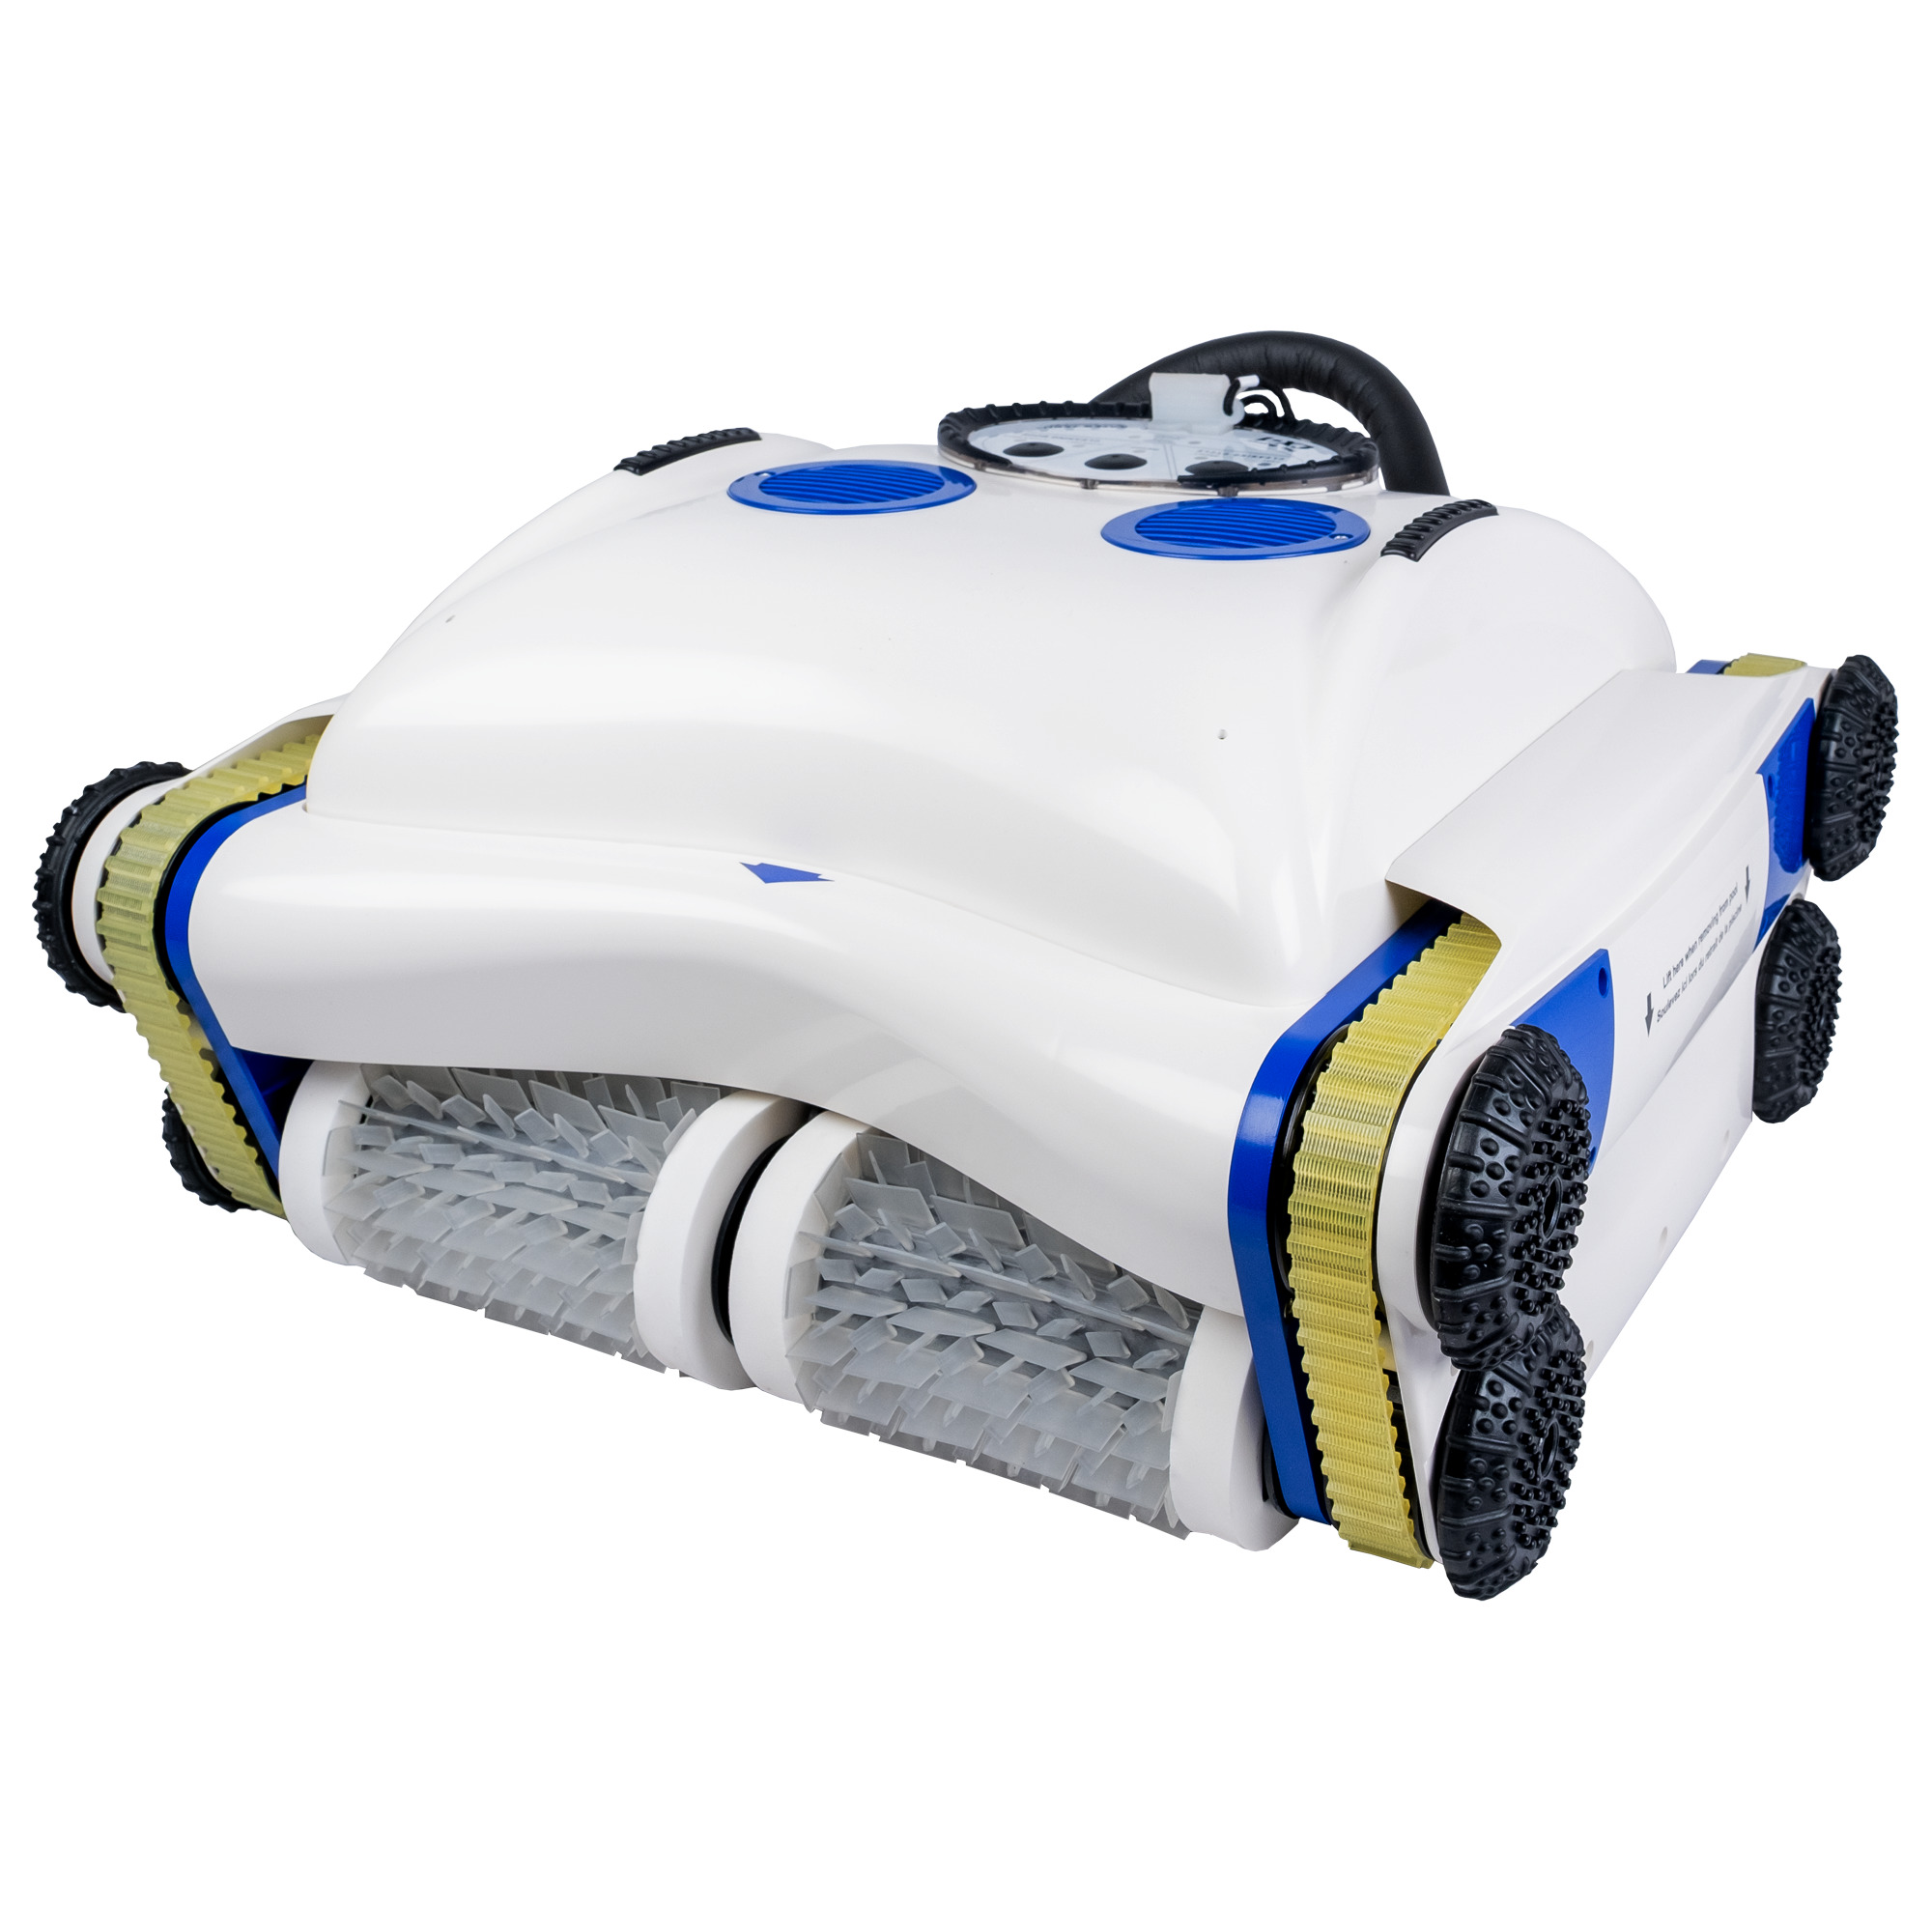 Cordless Robot Pool Cleaners Archives - Water Tech New